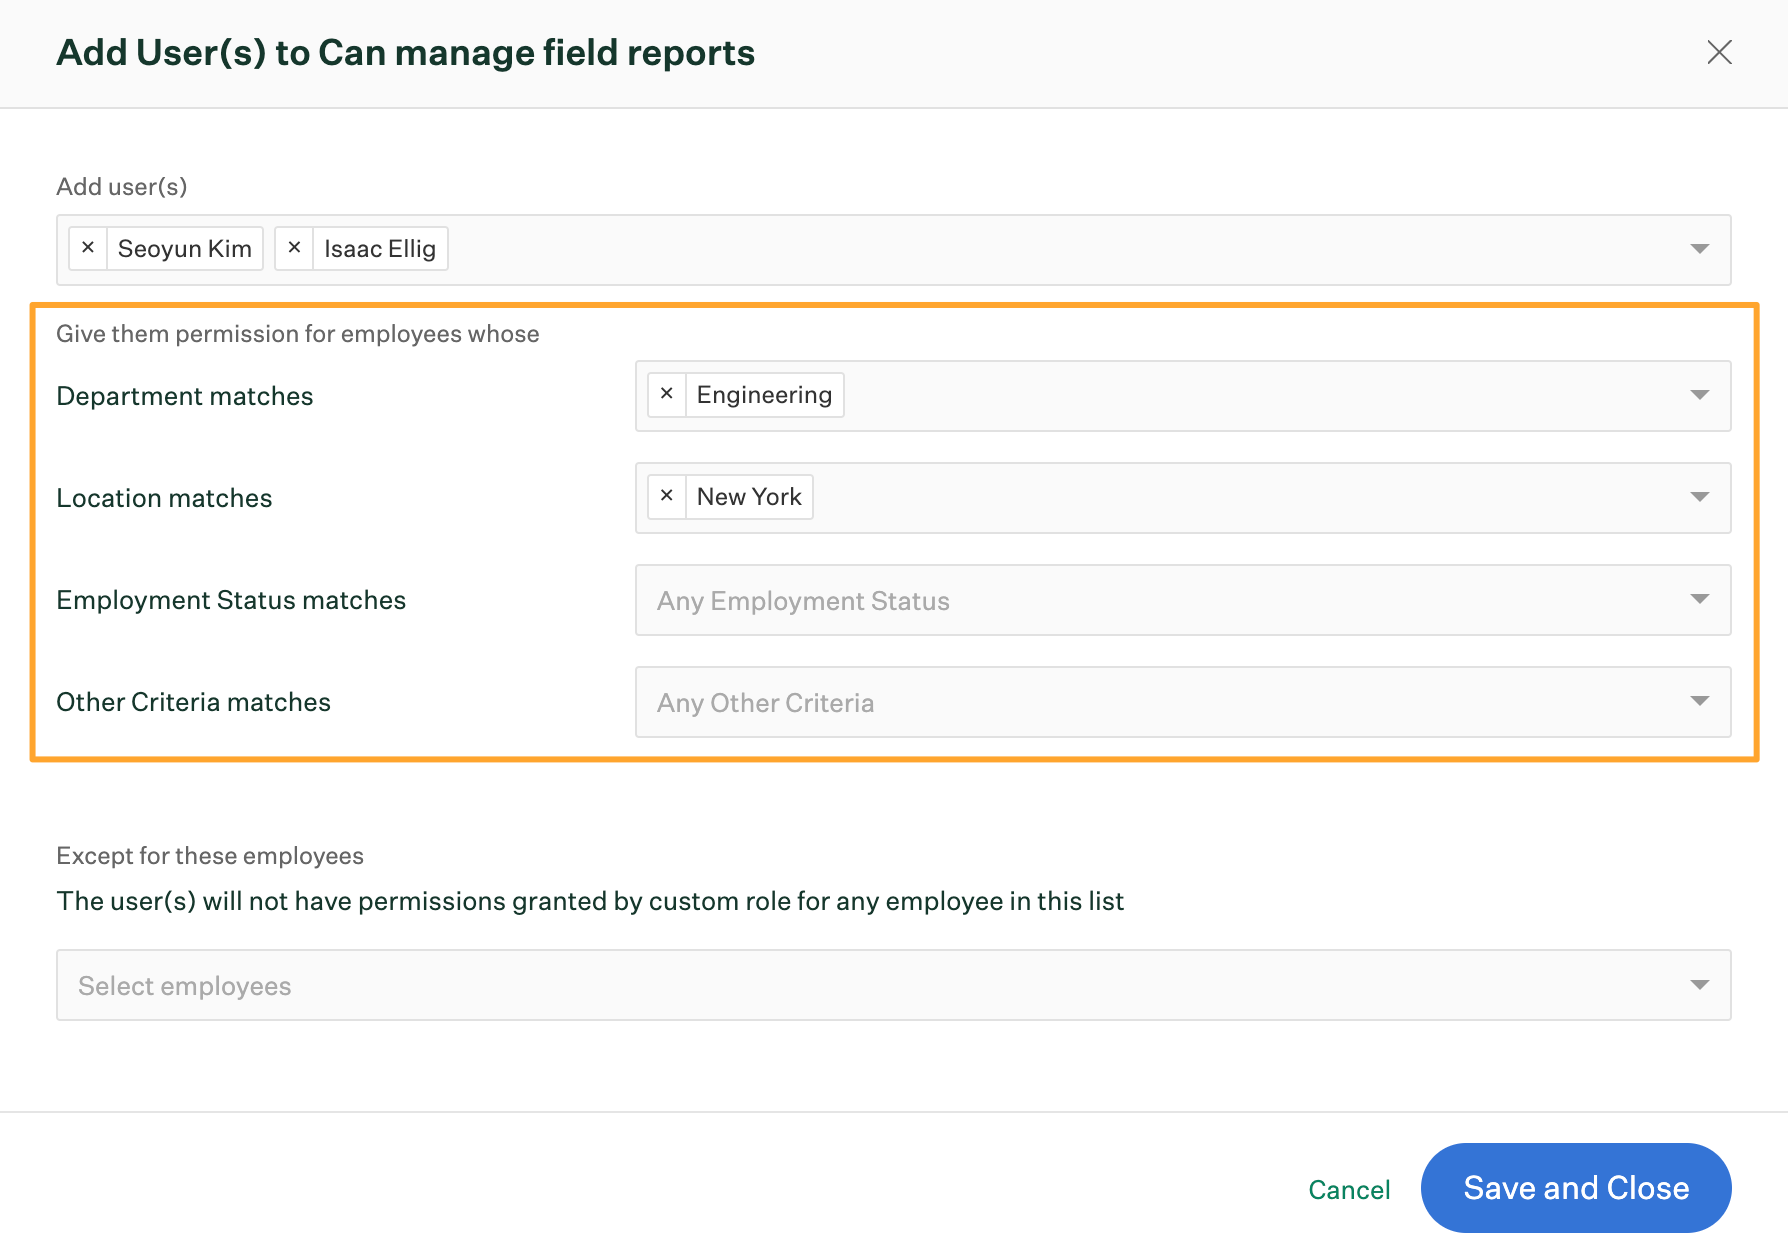 Can manage field reports new custom role with match criteria selected and highlighted